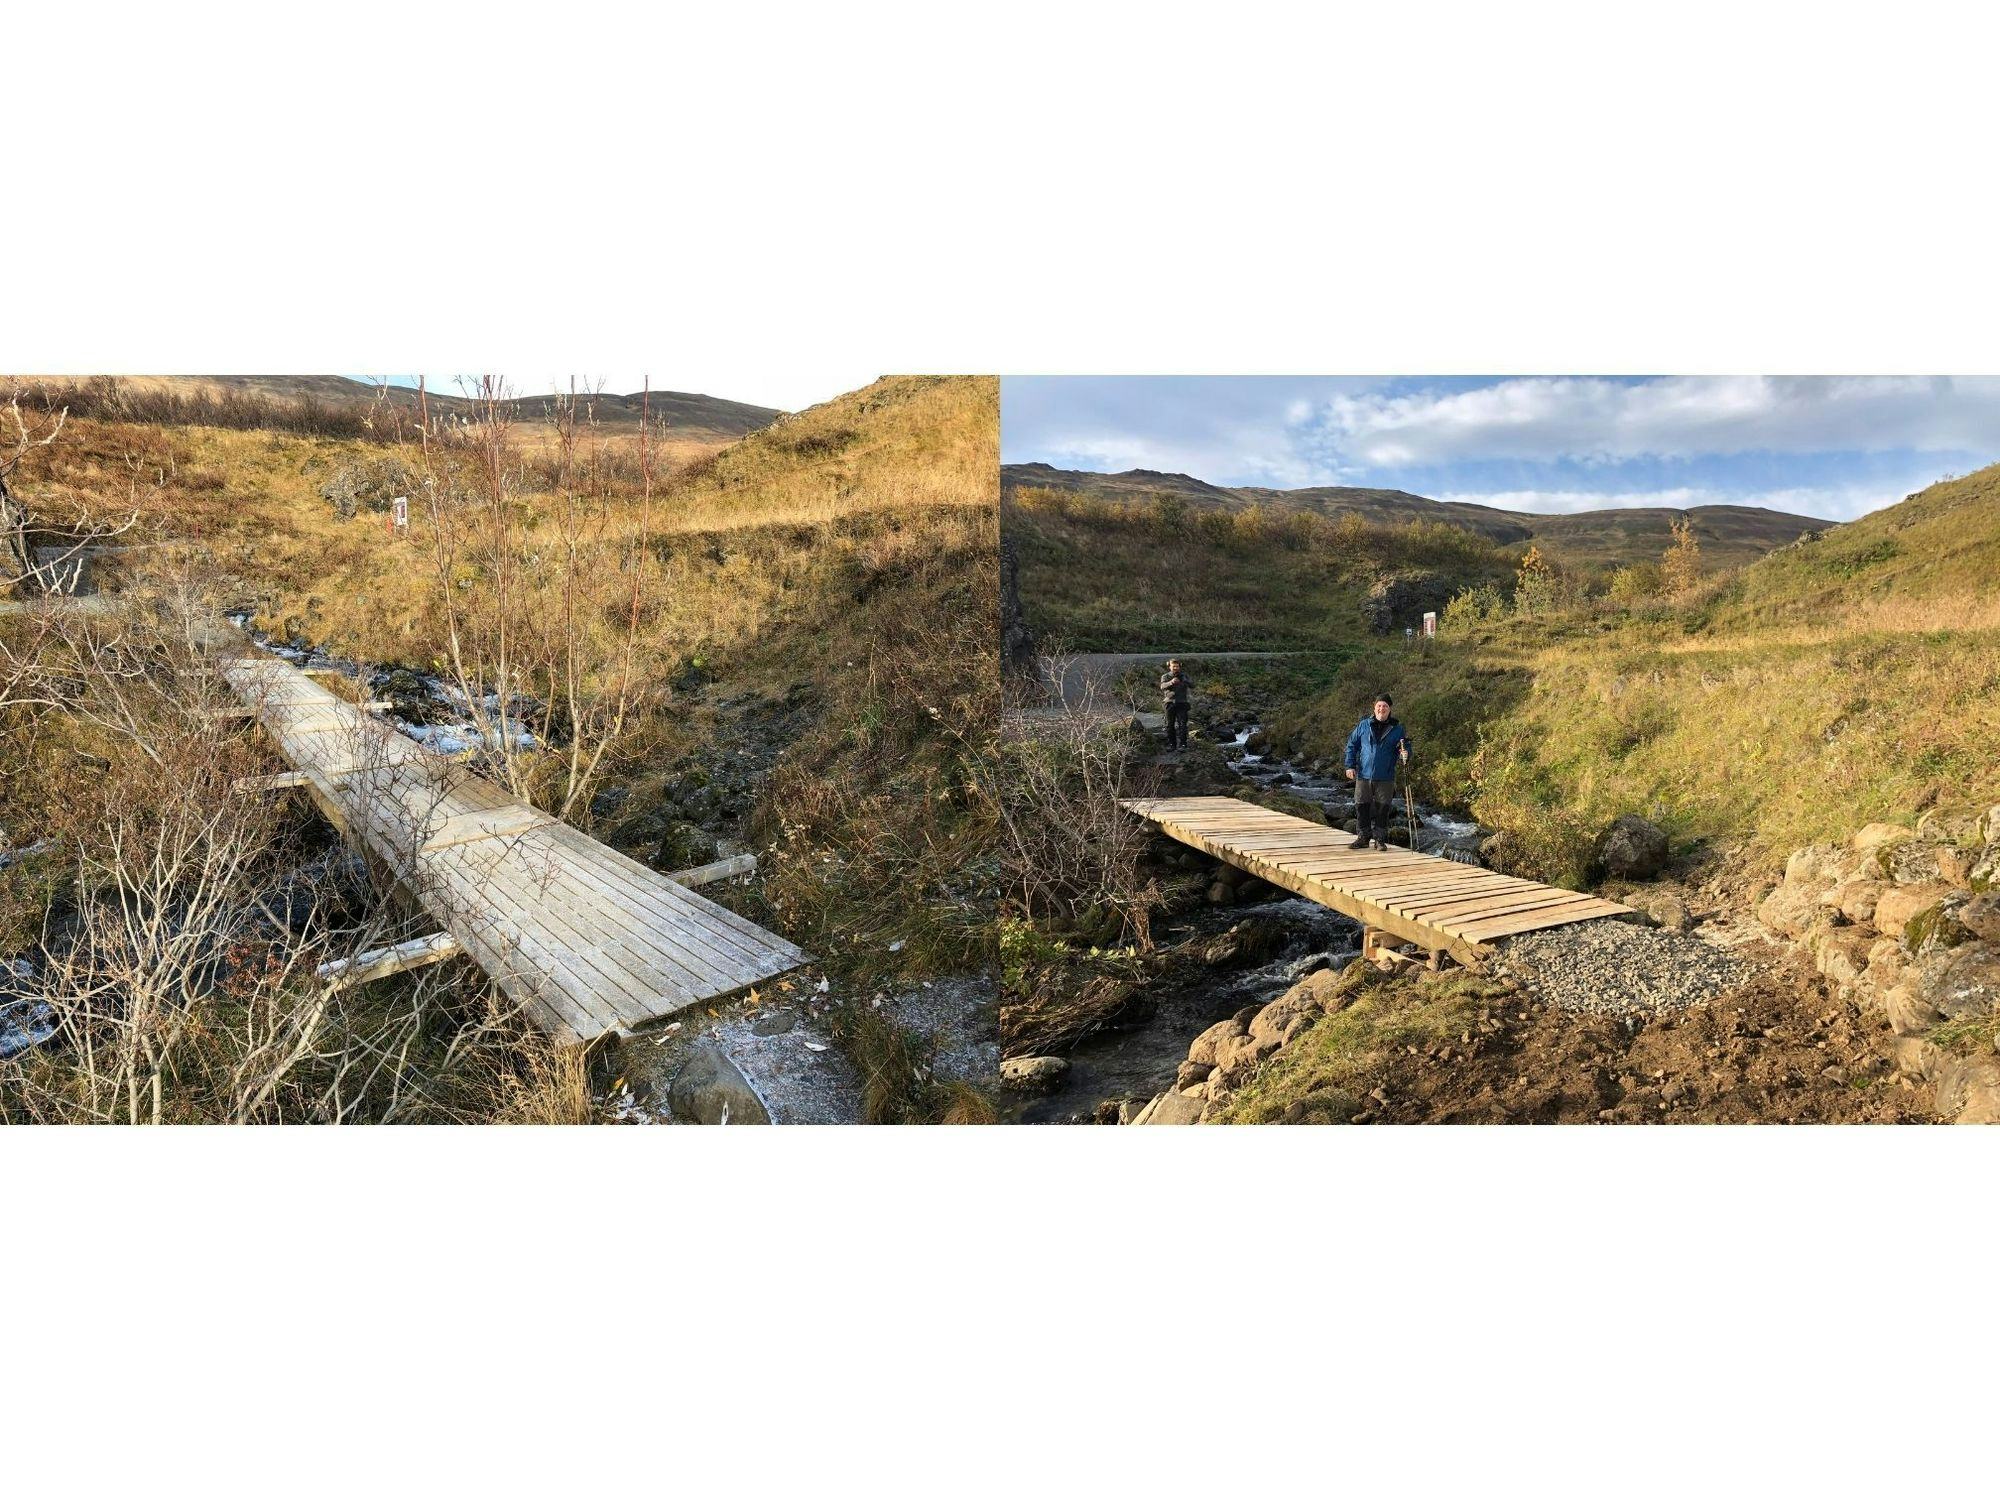  A comparative picture of wooden bridge over marshy landscape, with a hiker in one.